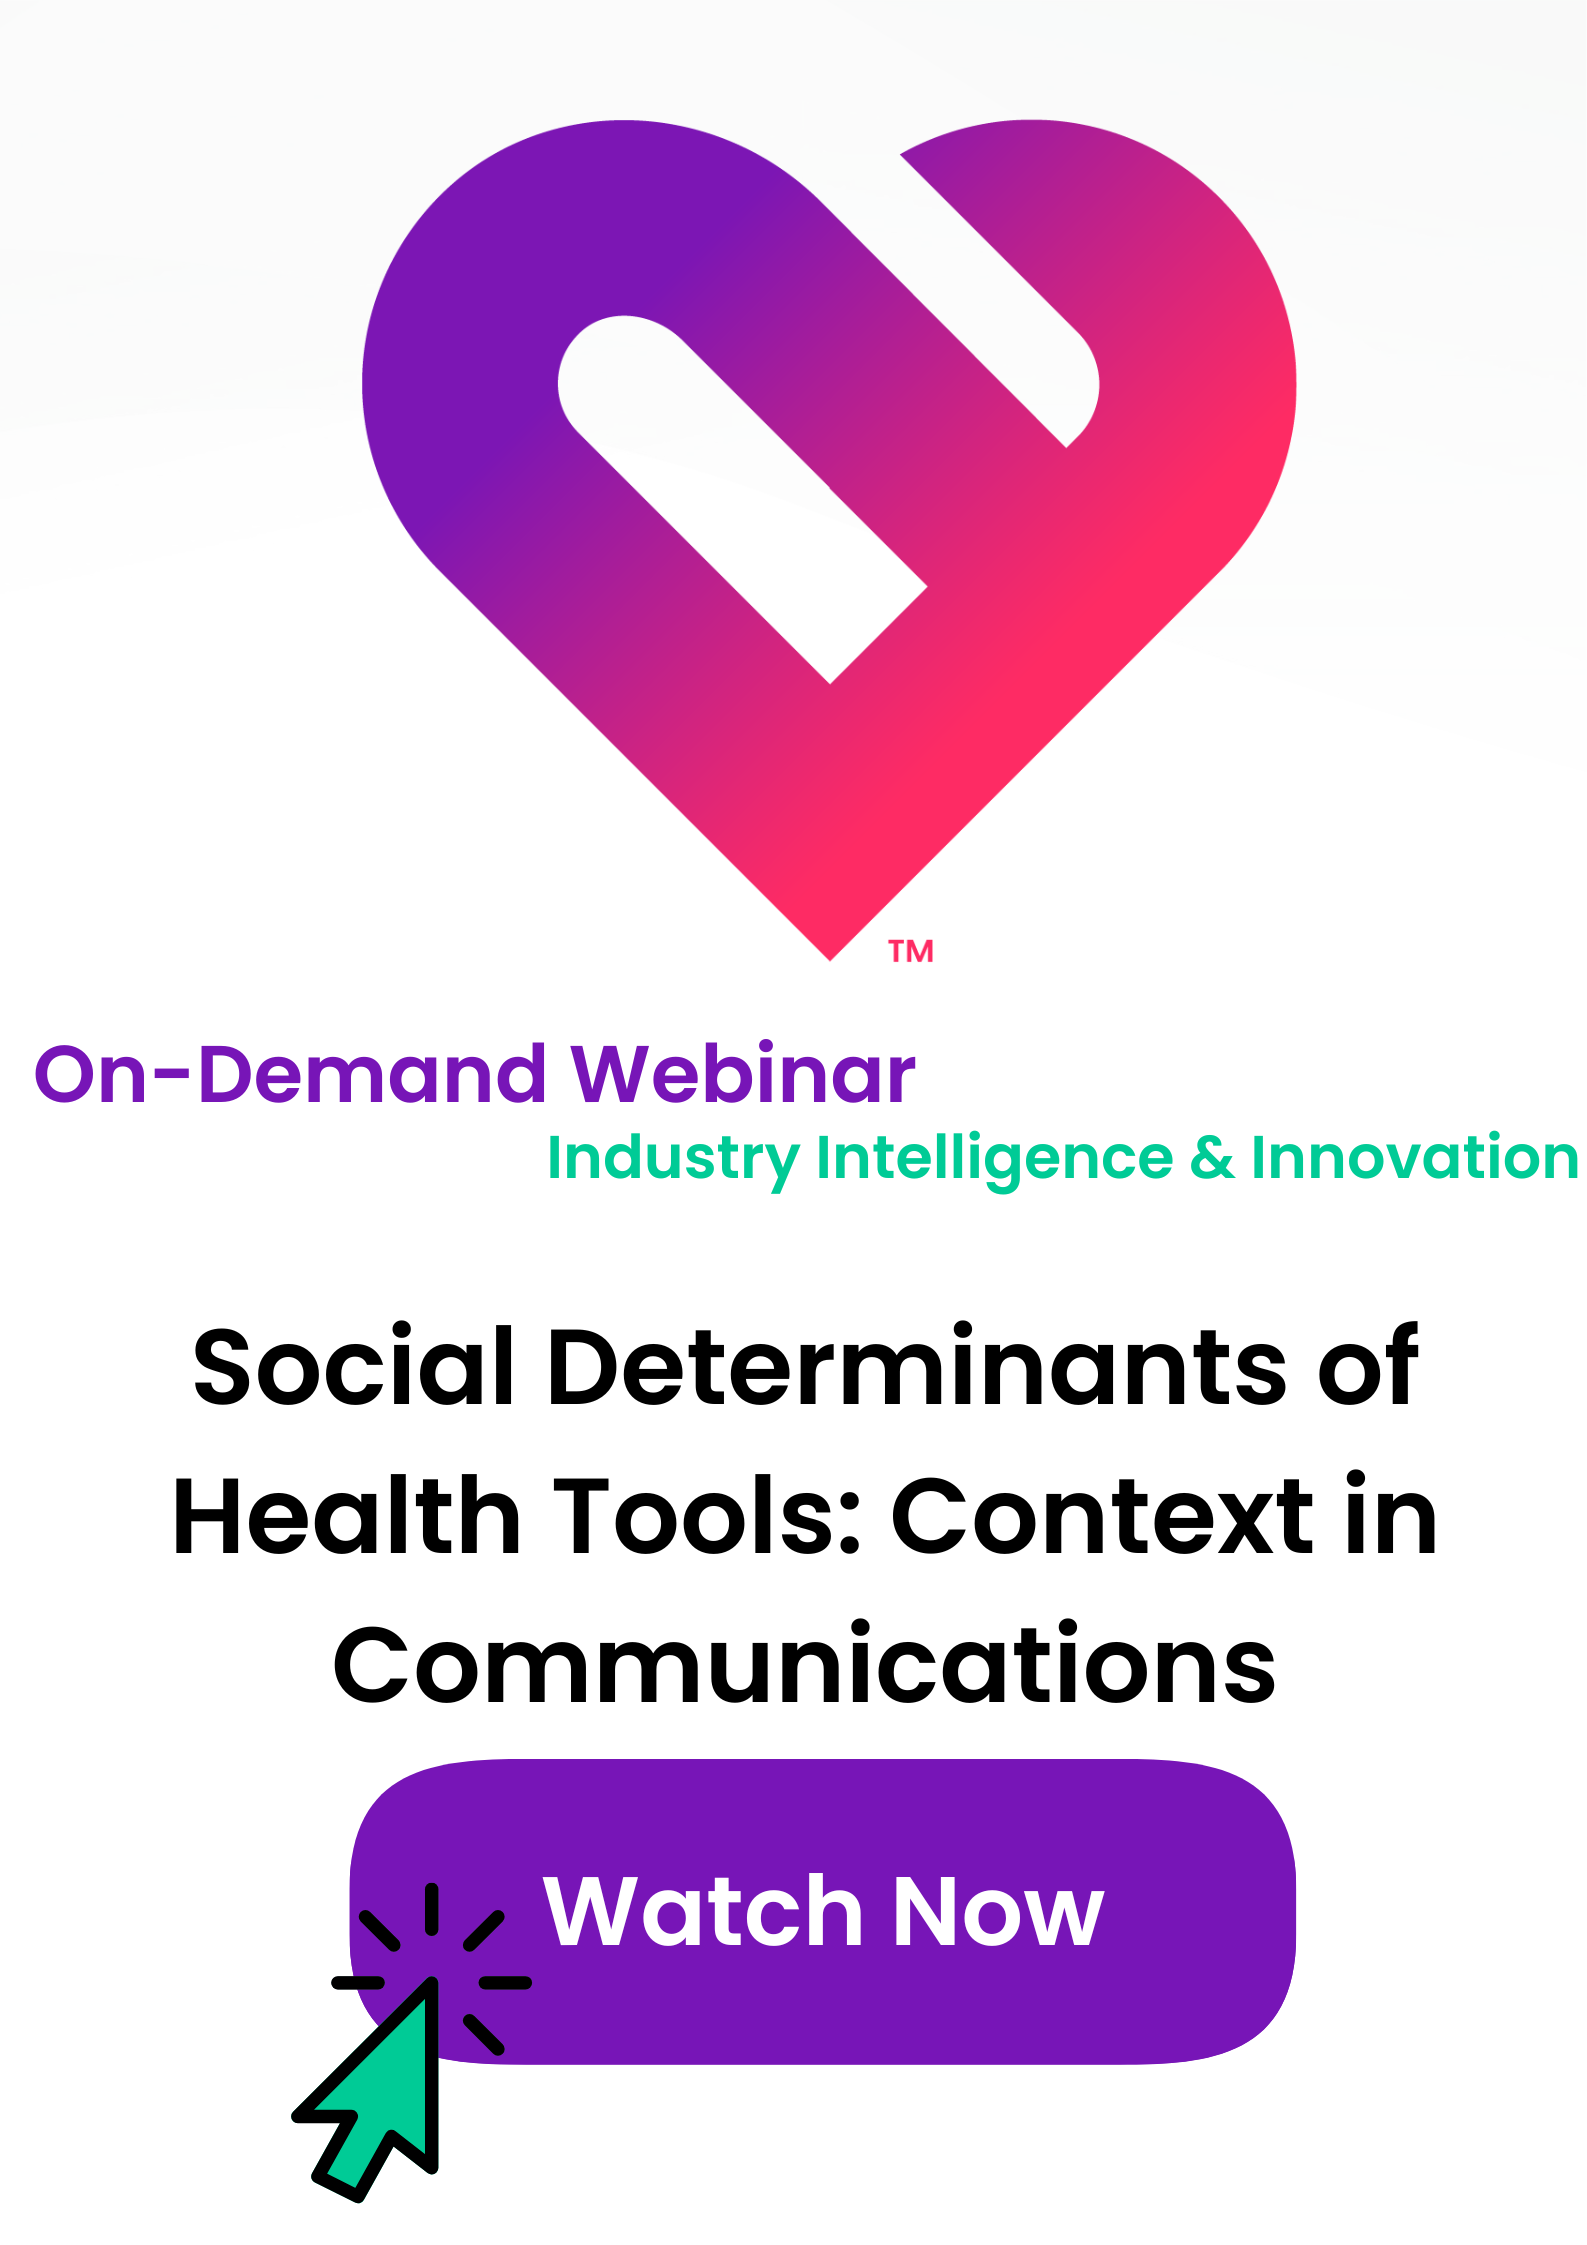 On-demand webinar tile for Social Determinants of Health Tools, click to watch now